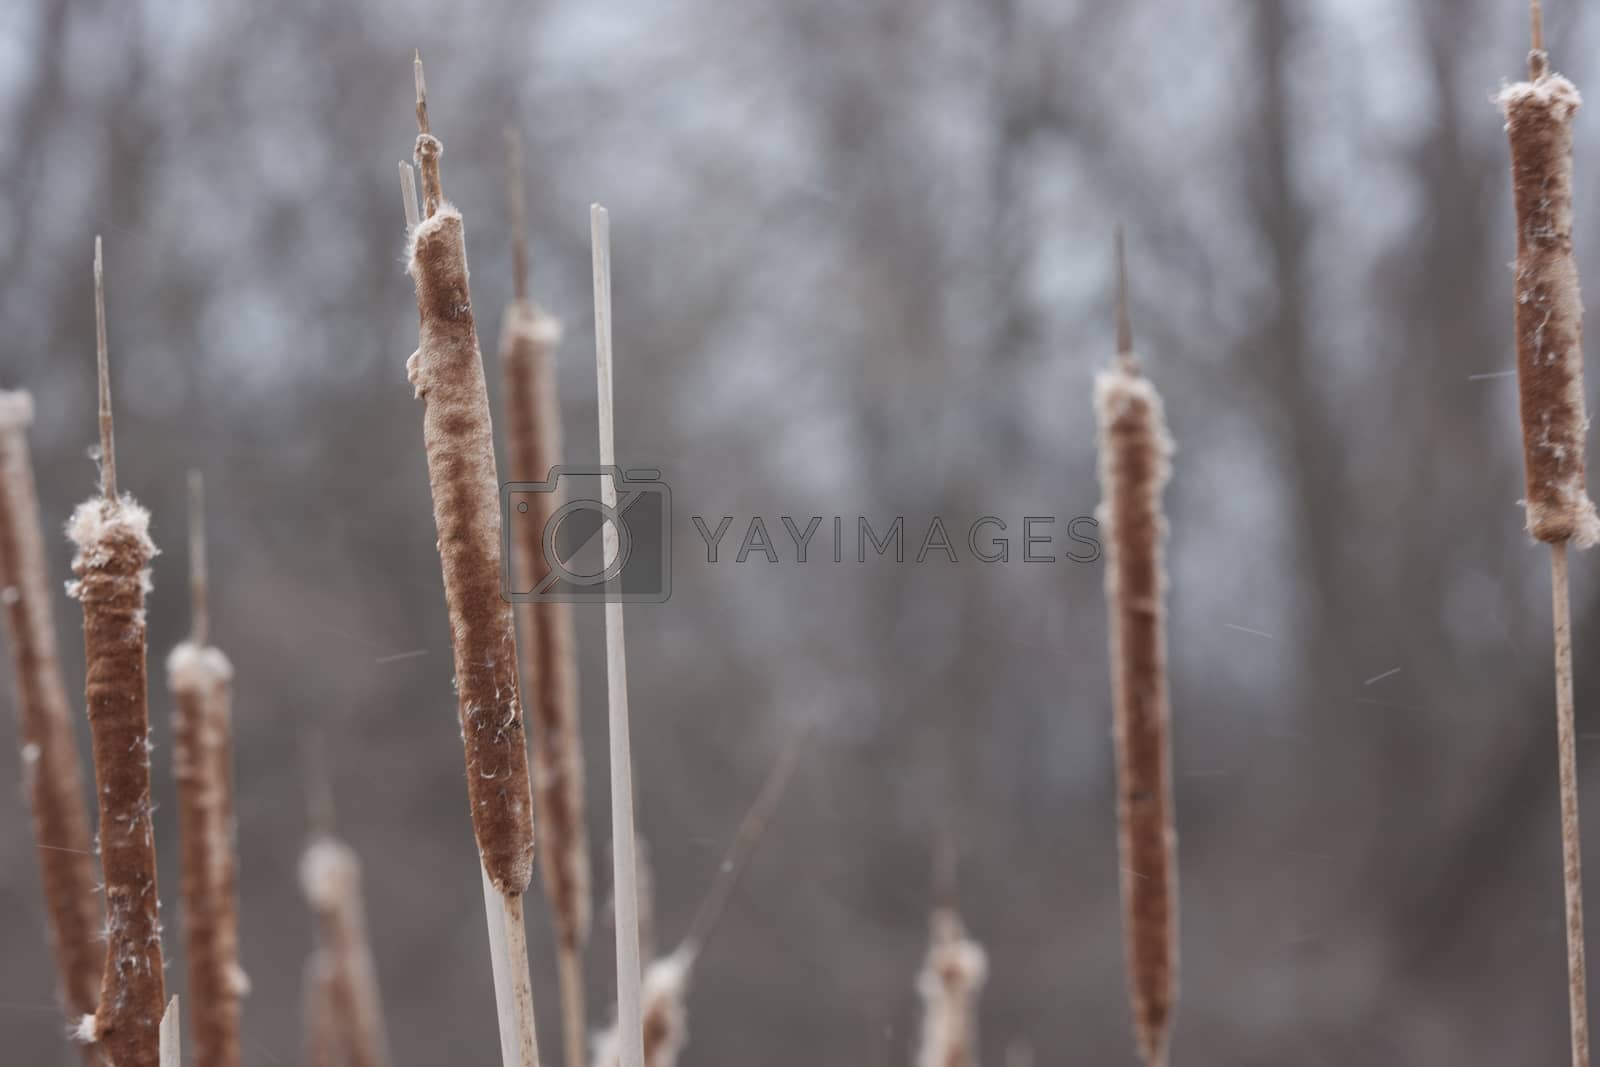 Royalty free image of cattail reeds by adamfilip